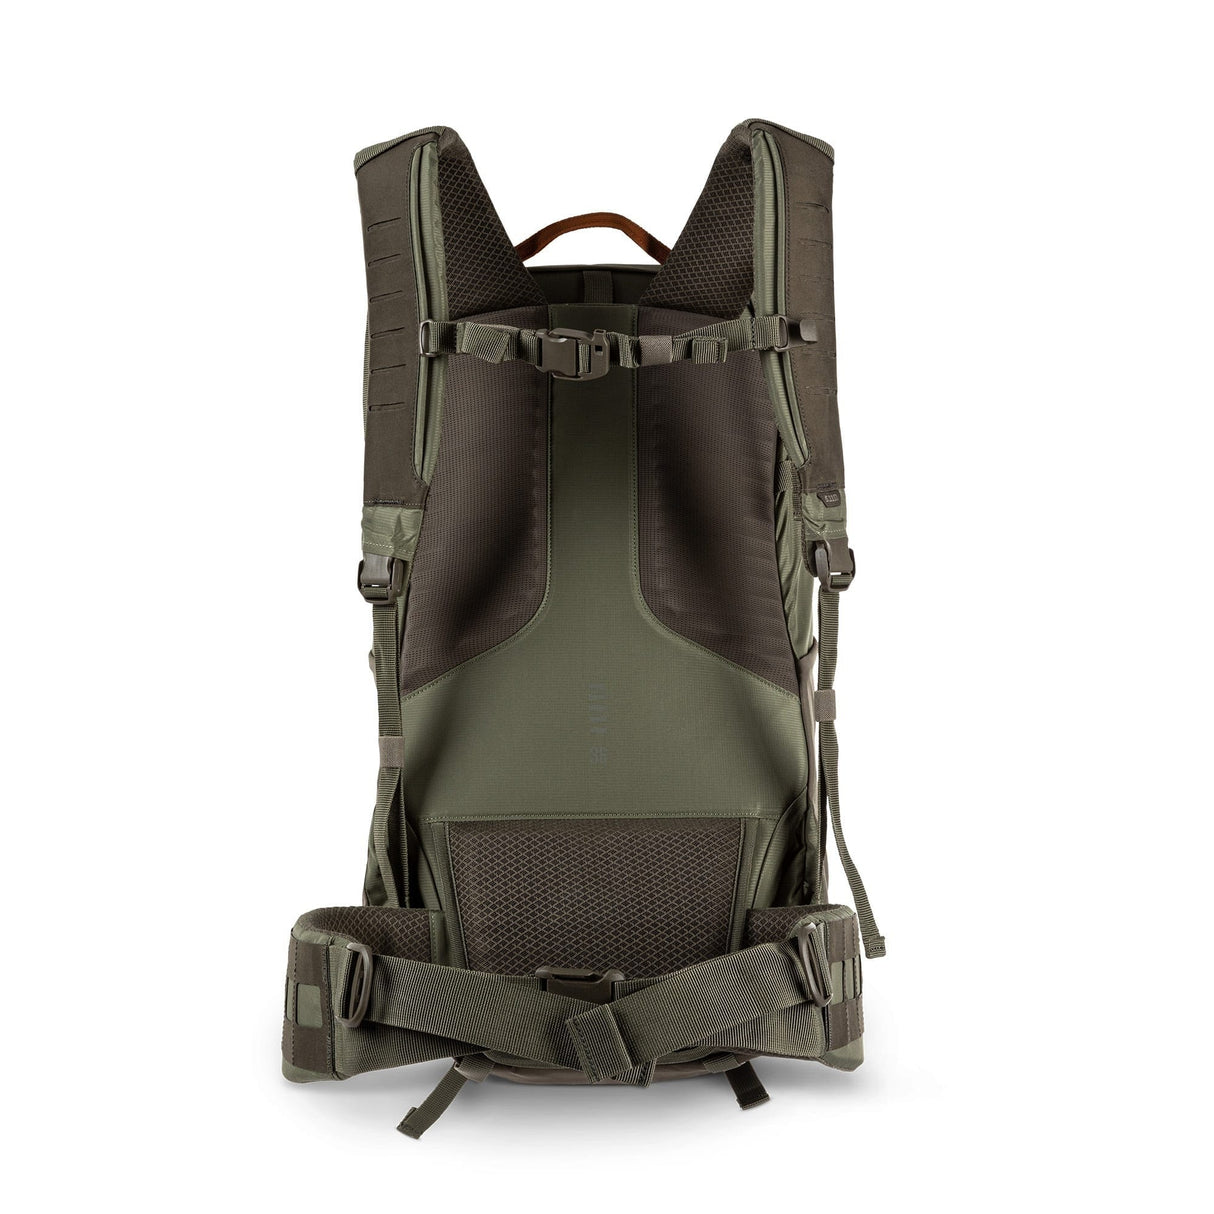 SKYWEIGHT 36L BACKPACK